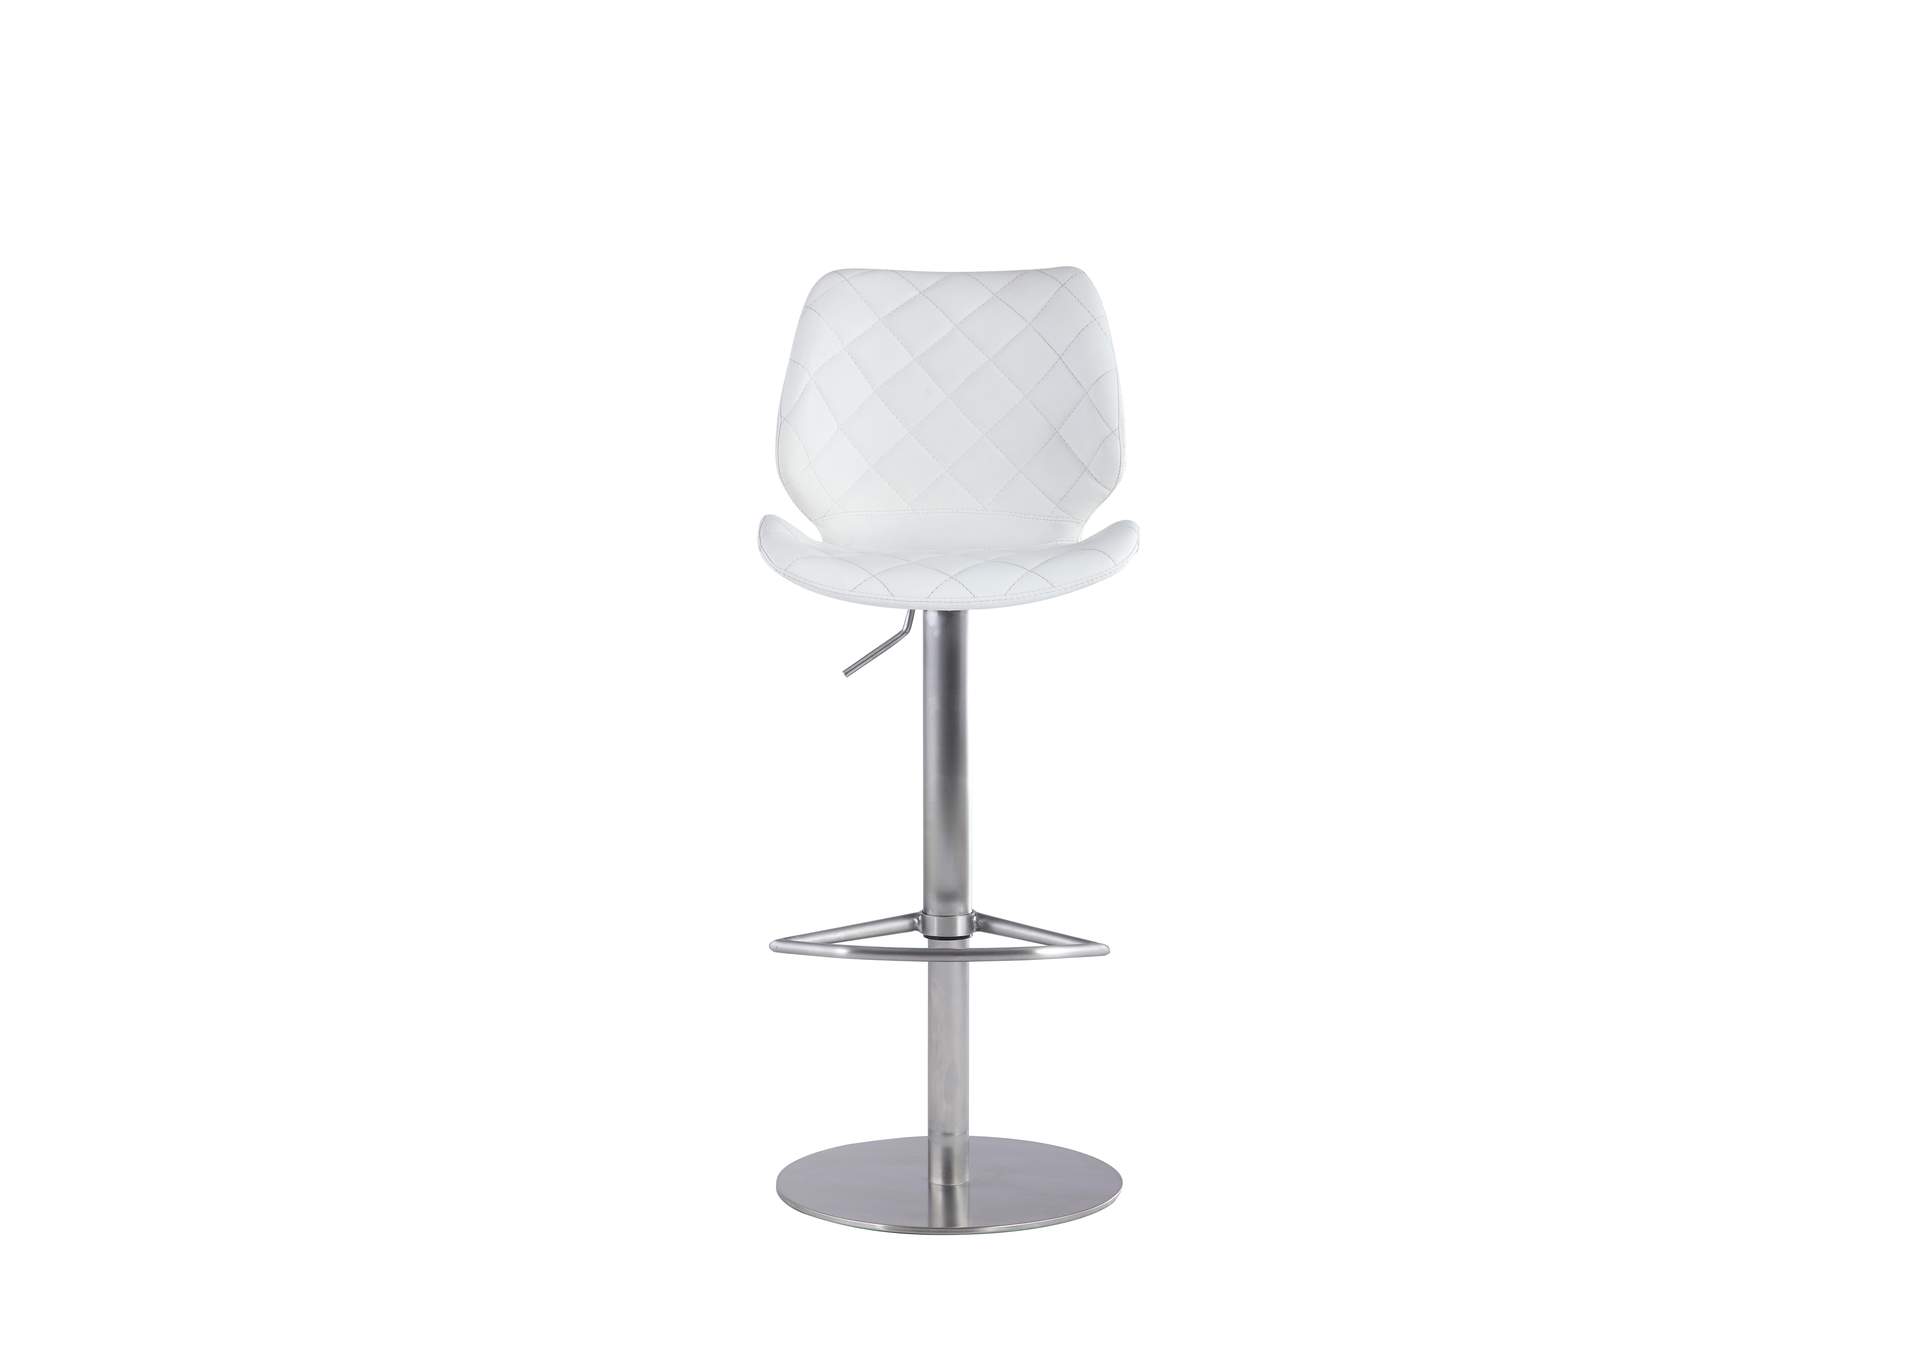 Brushed Stainless Steel Modern Pneumatic-Adjustable Stool w/ Diamond Stitched Seat,Chintaly Imports